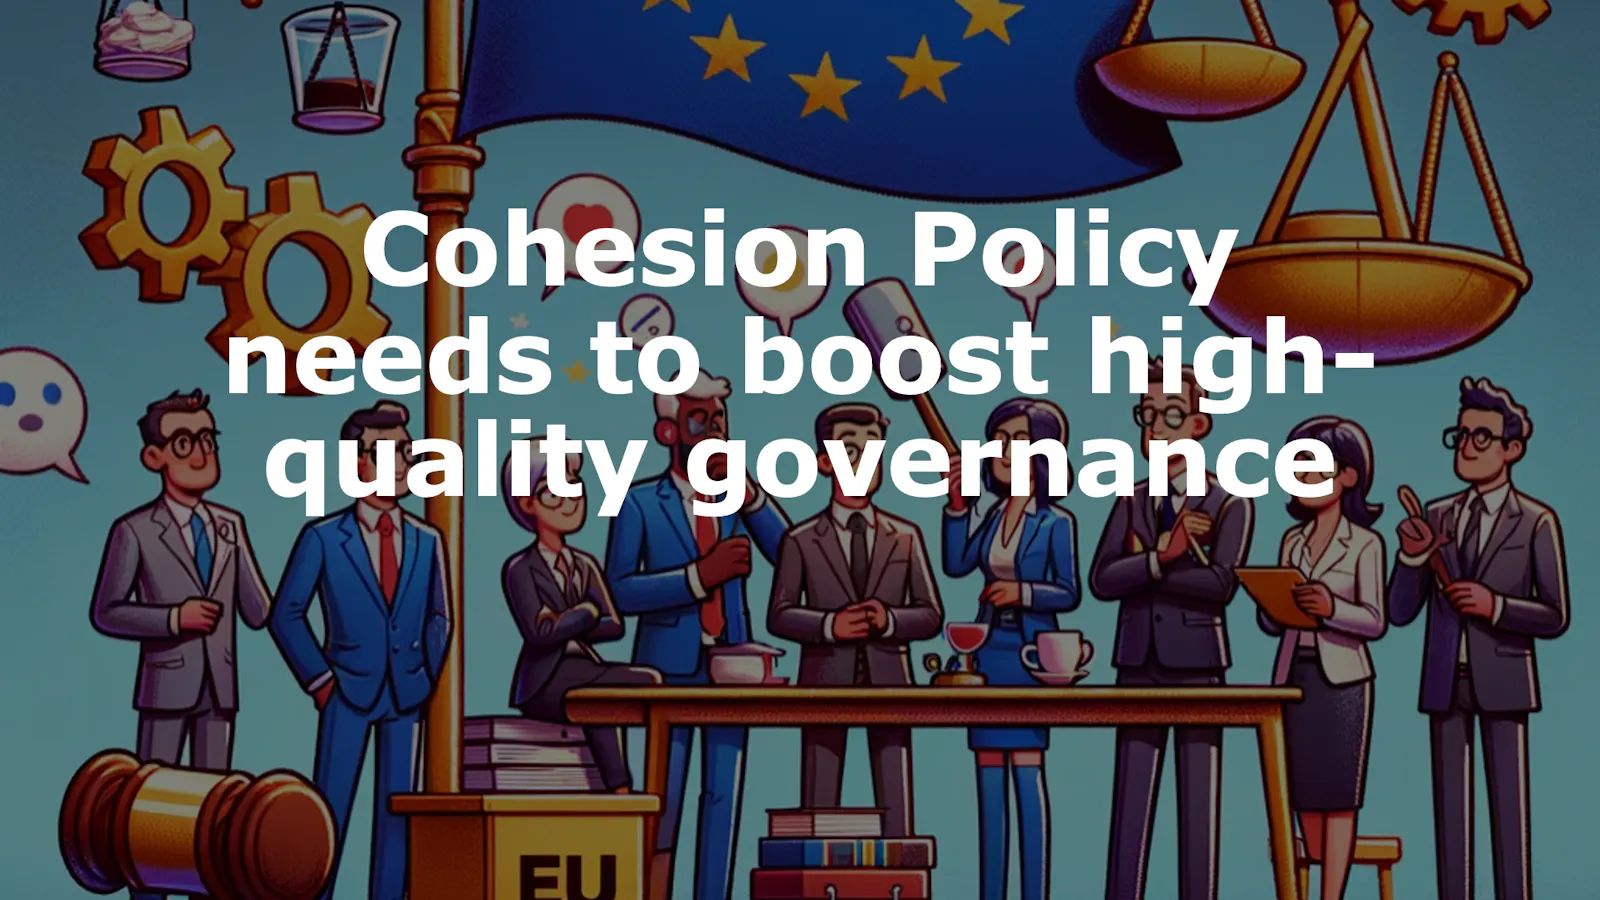 Cohesion Policy needs to boost high-quality governance